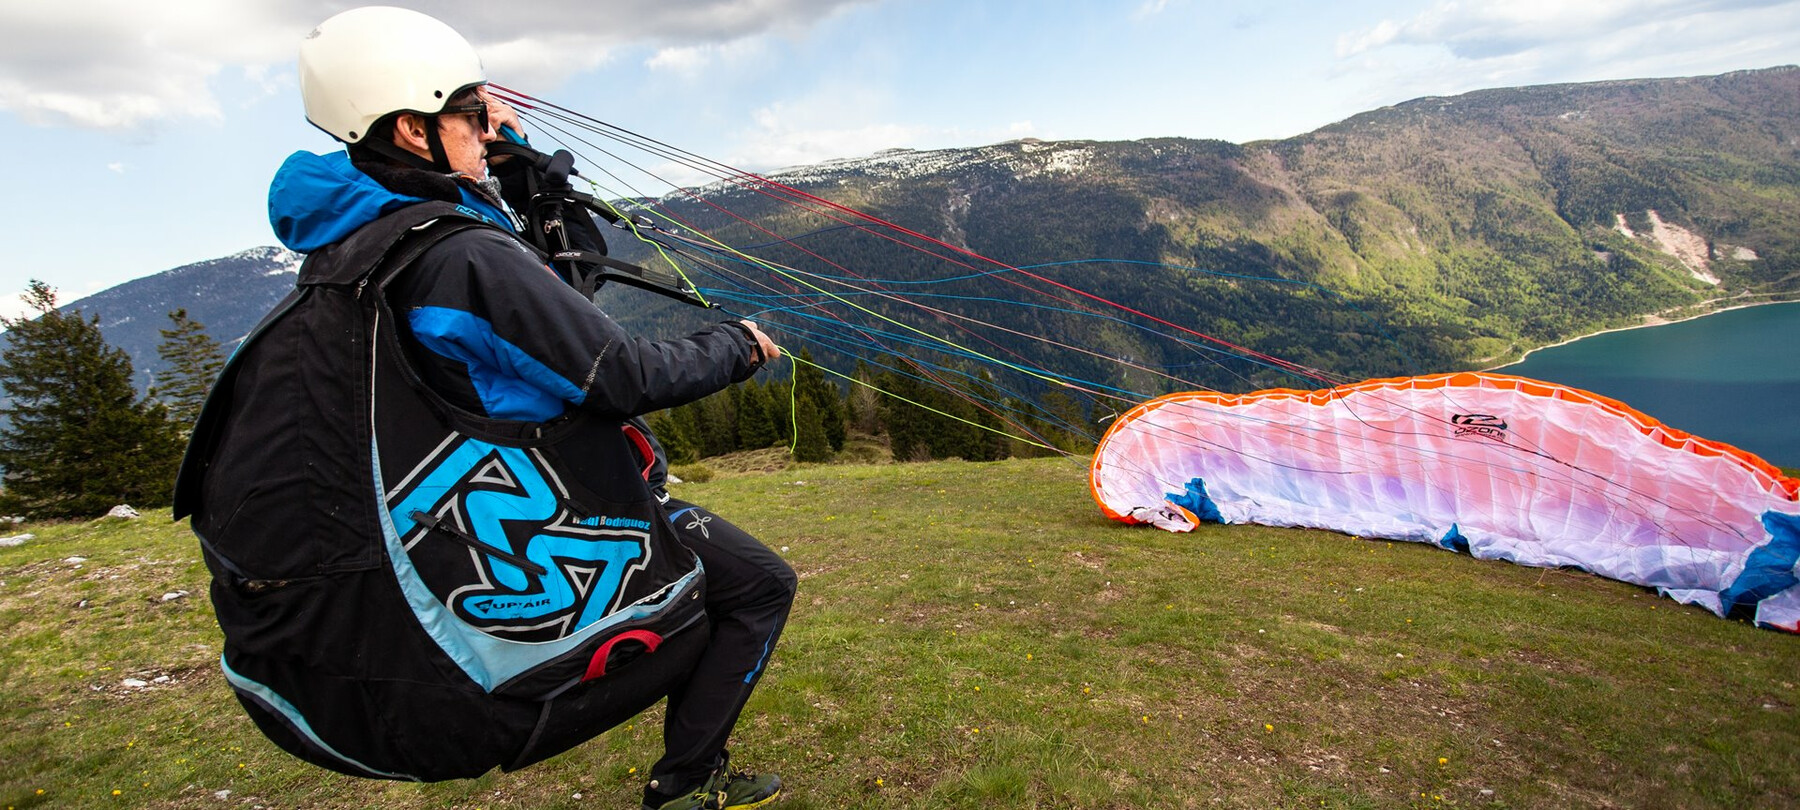 The lakes in Trentino: the story of Nicola Donini, a paraglider